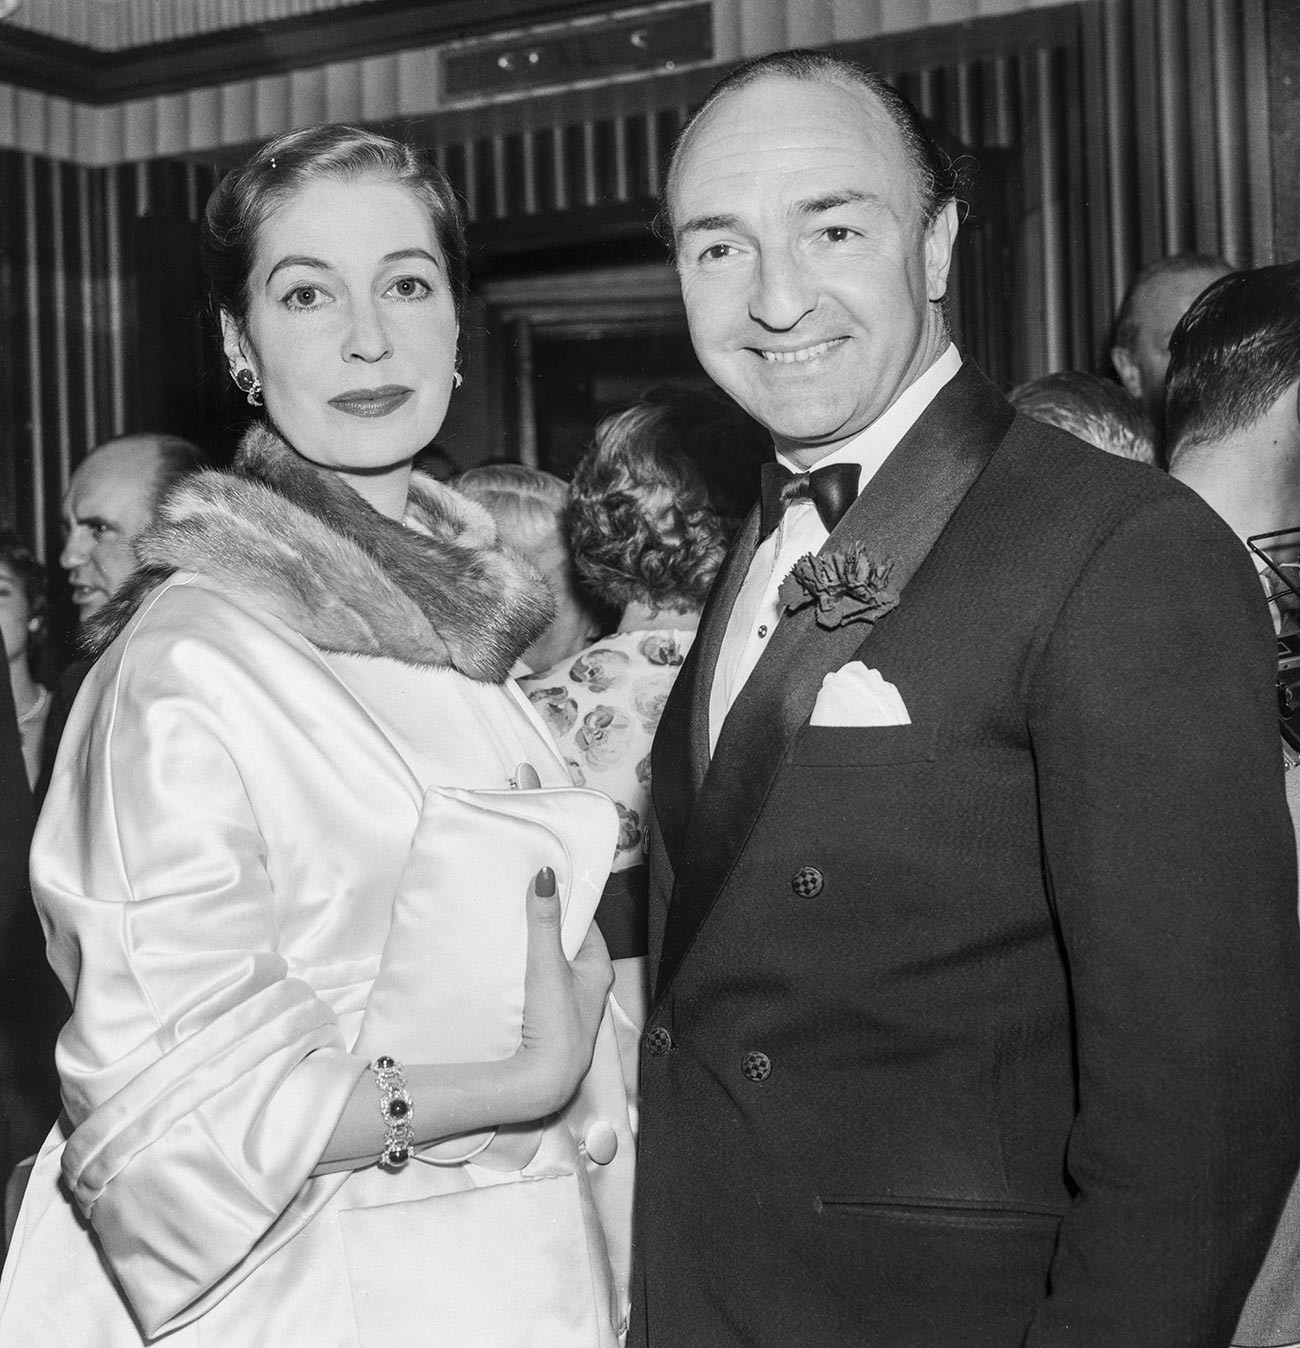 John Profumo and his wife Valerie Hobson.